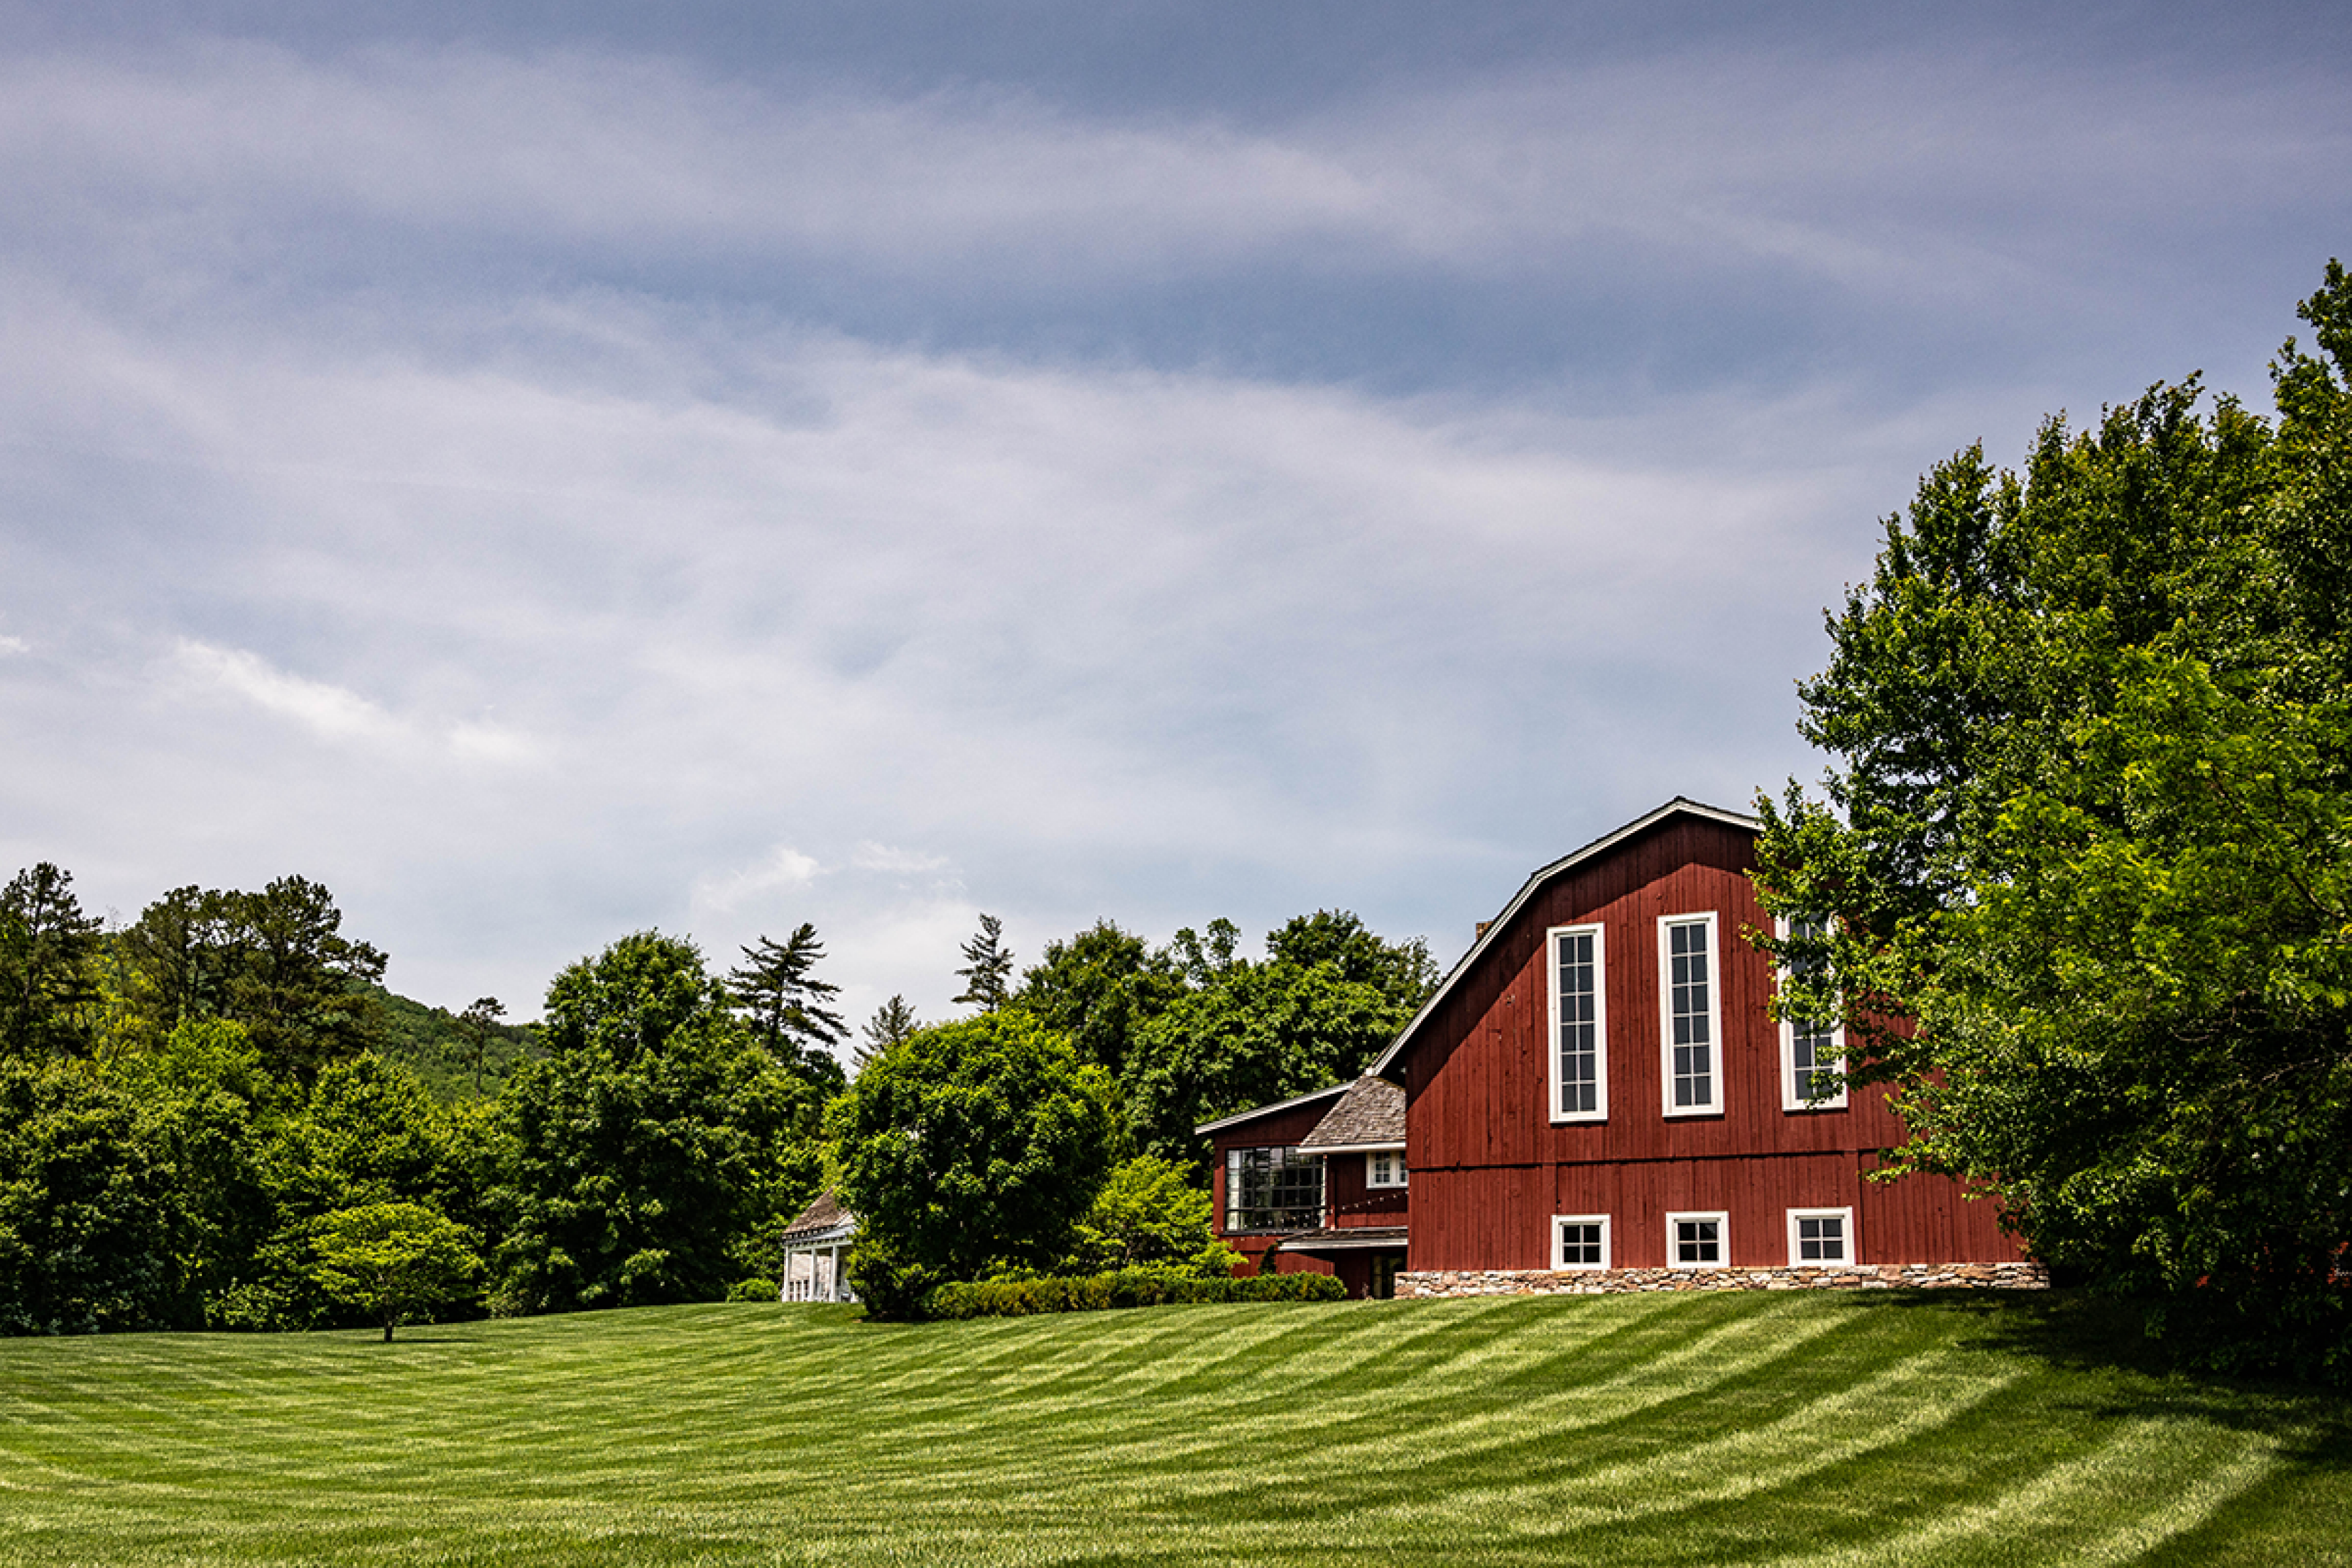 Red barn at the top of a hill